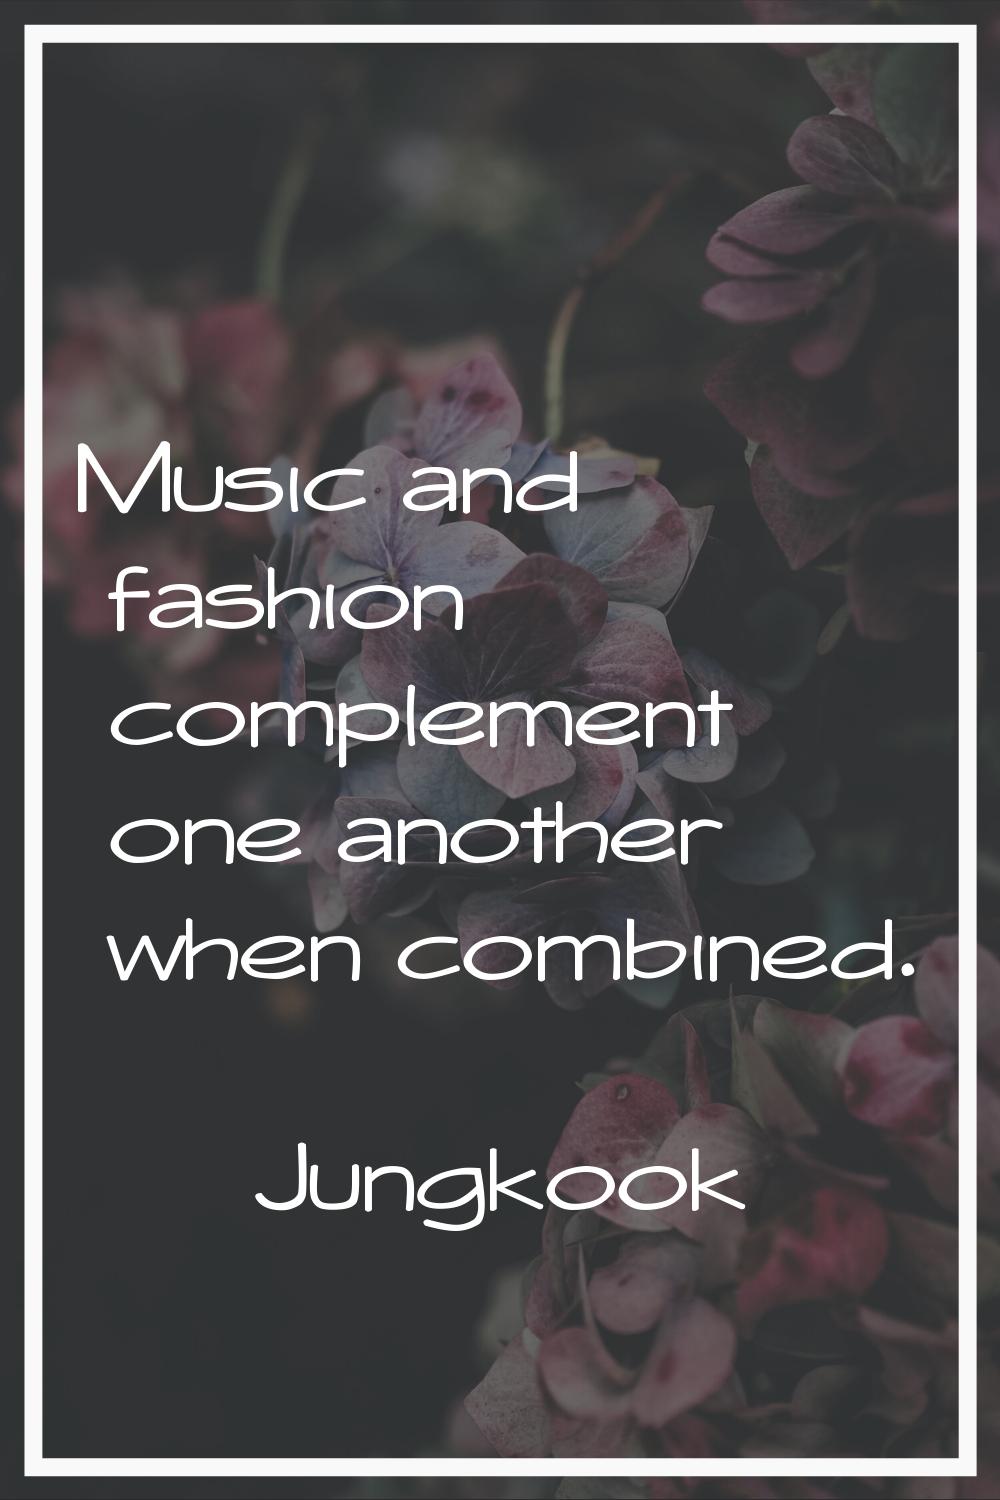 Music and fashion complement one another when combined.